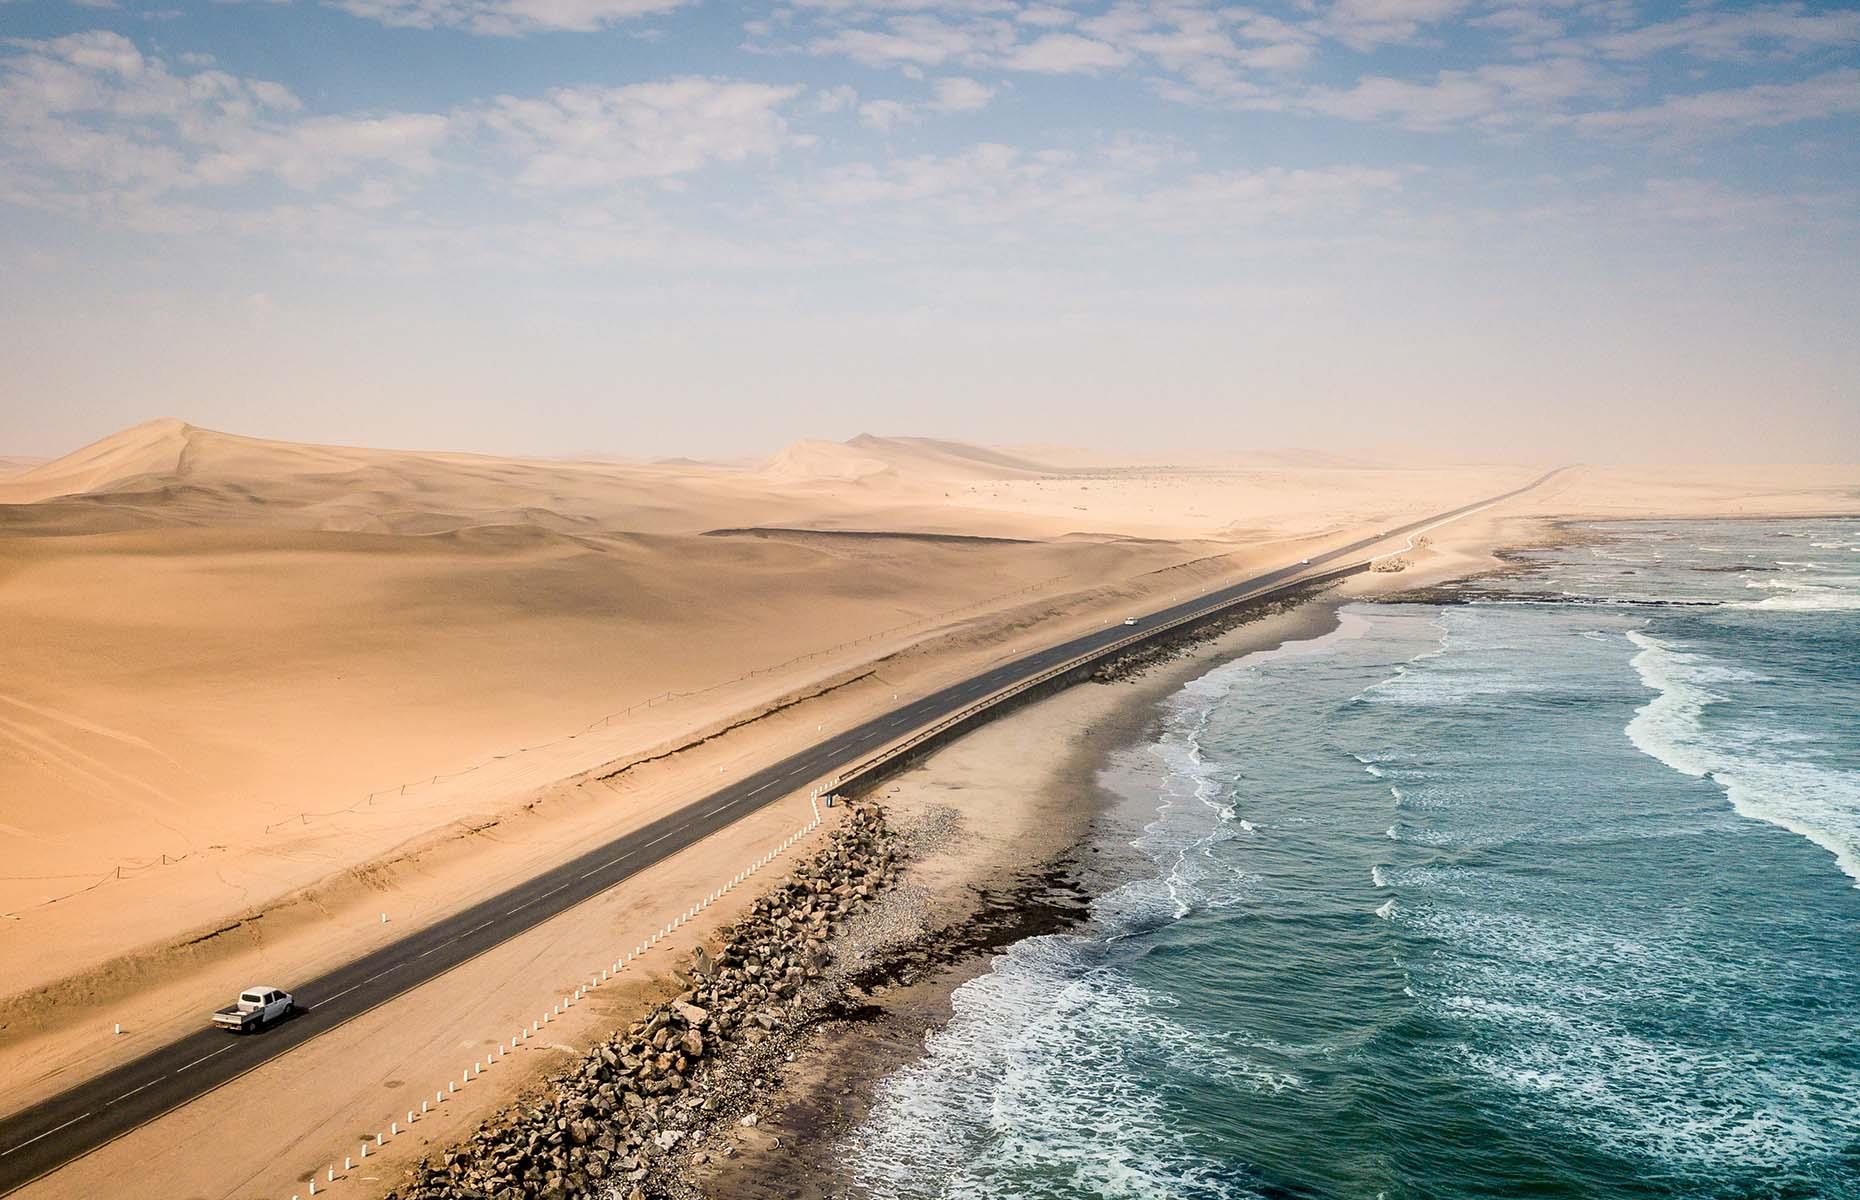 As harsh, desolate and eerie as its name suggests, Namibia’s Skeleton Coast is the epitome of untamed natural beauty. Located between the former German colonial town of Swakopmund and the Angolan border, the 311-mile (500km) coastline encompasses towering sand dunes, crashing waves fuelled by the icy Benguela Current, and the scattered remains of animal bones and shipwrecks which give the region its moniker.